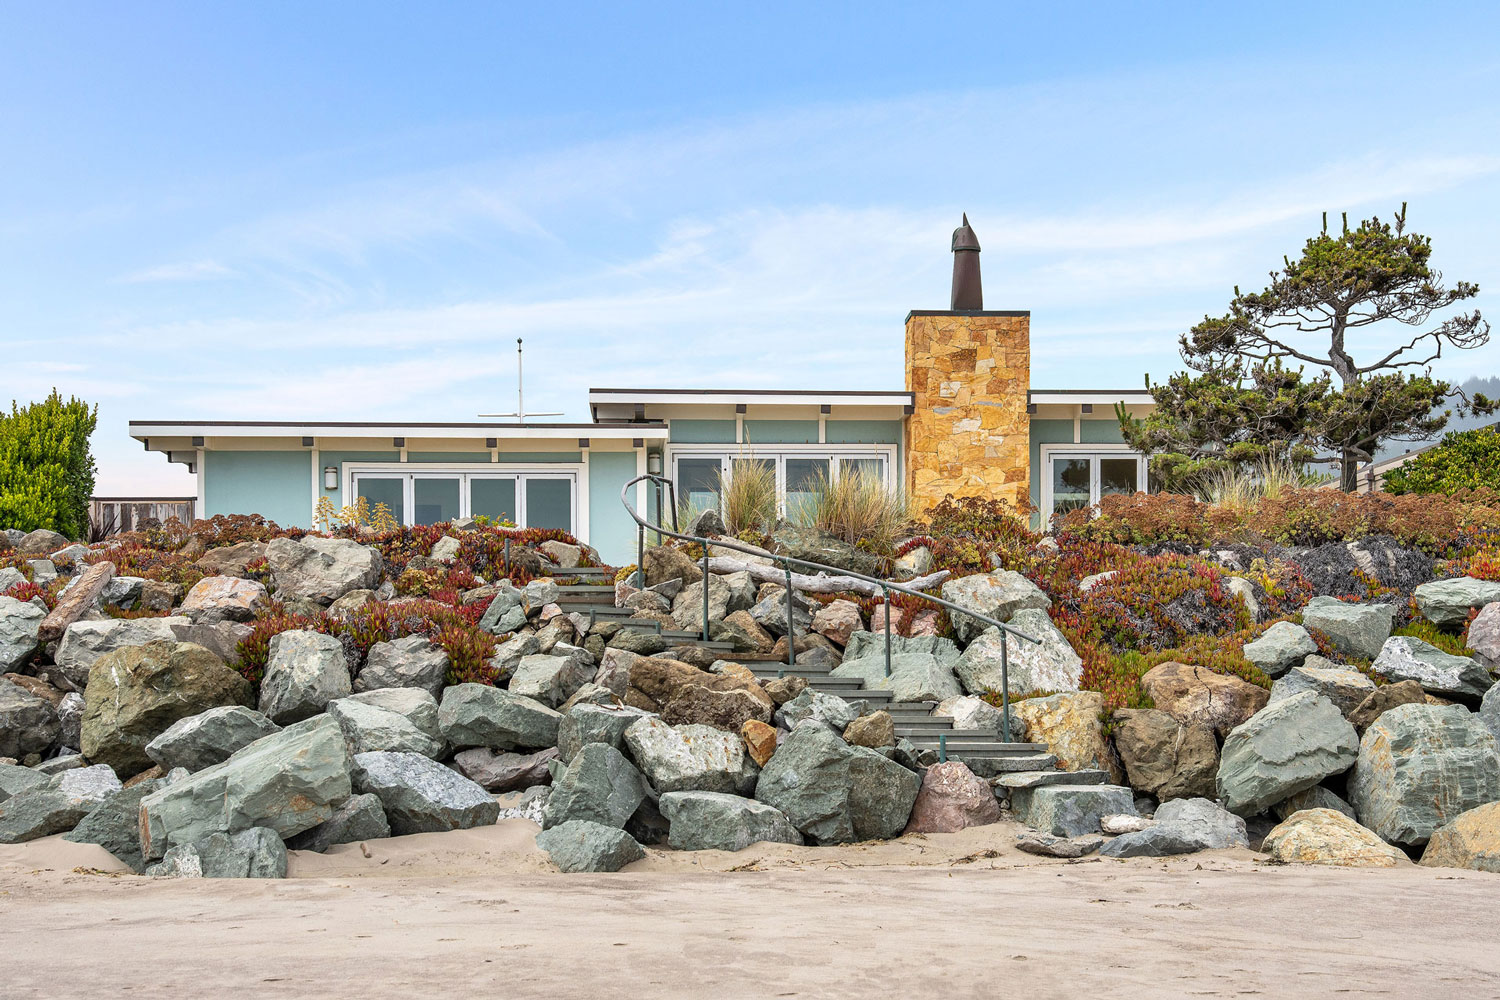 Oceanfront home in Stinson Beach. Fully renovated house with custom built steps leading to a private beach. Exterior painted aqua marine blue with white trim.